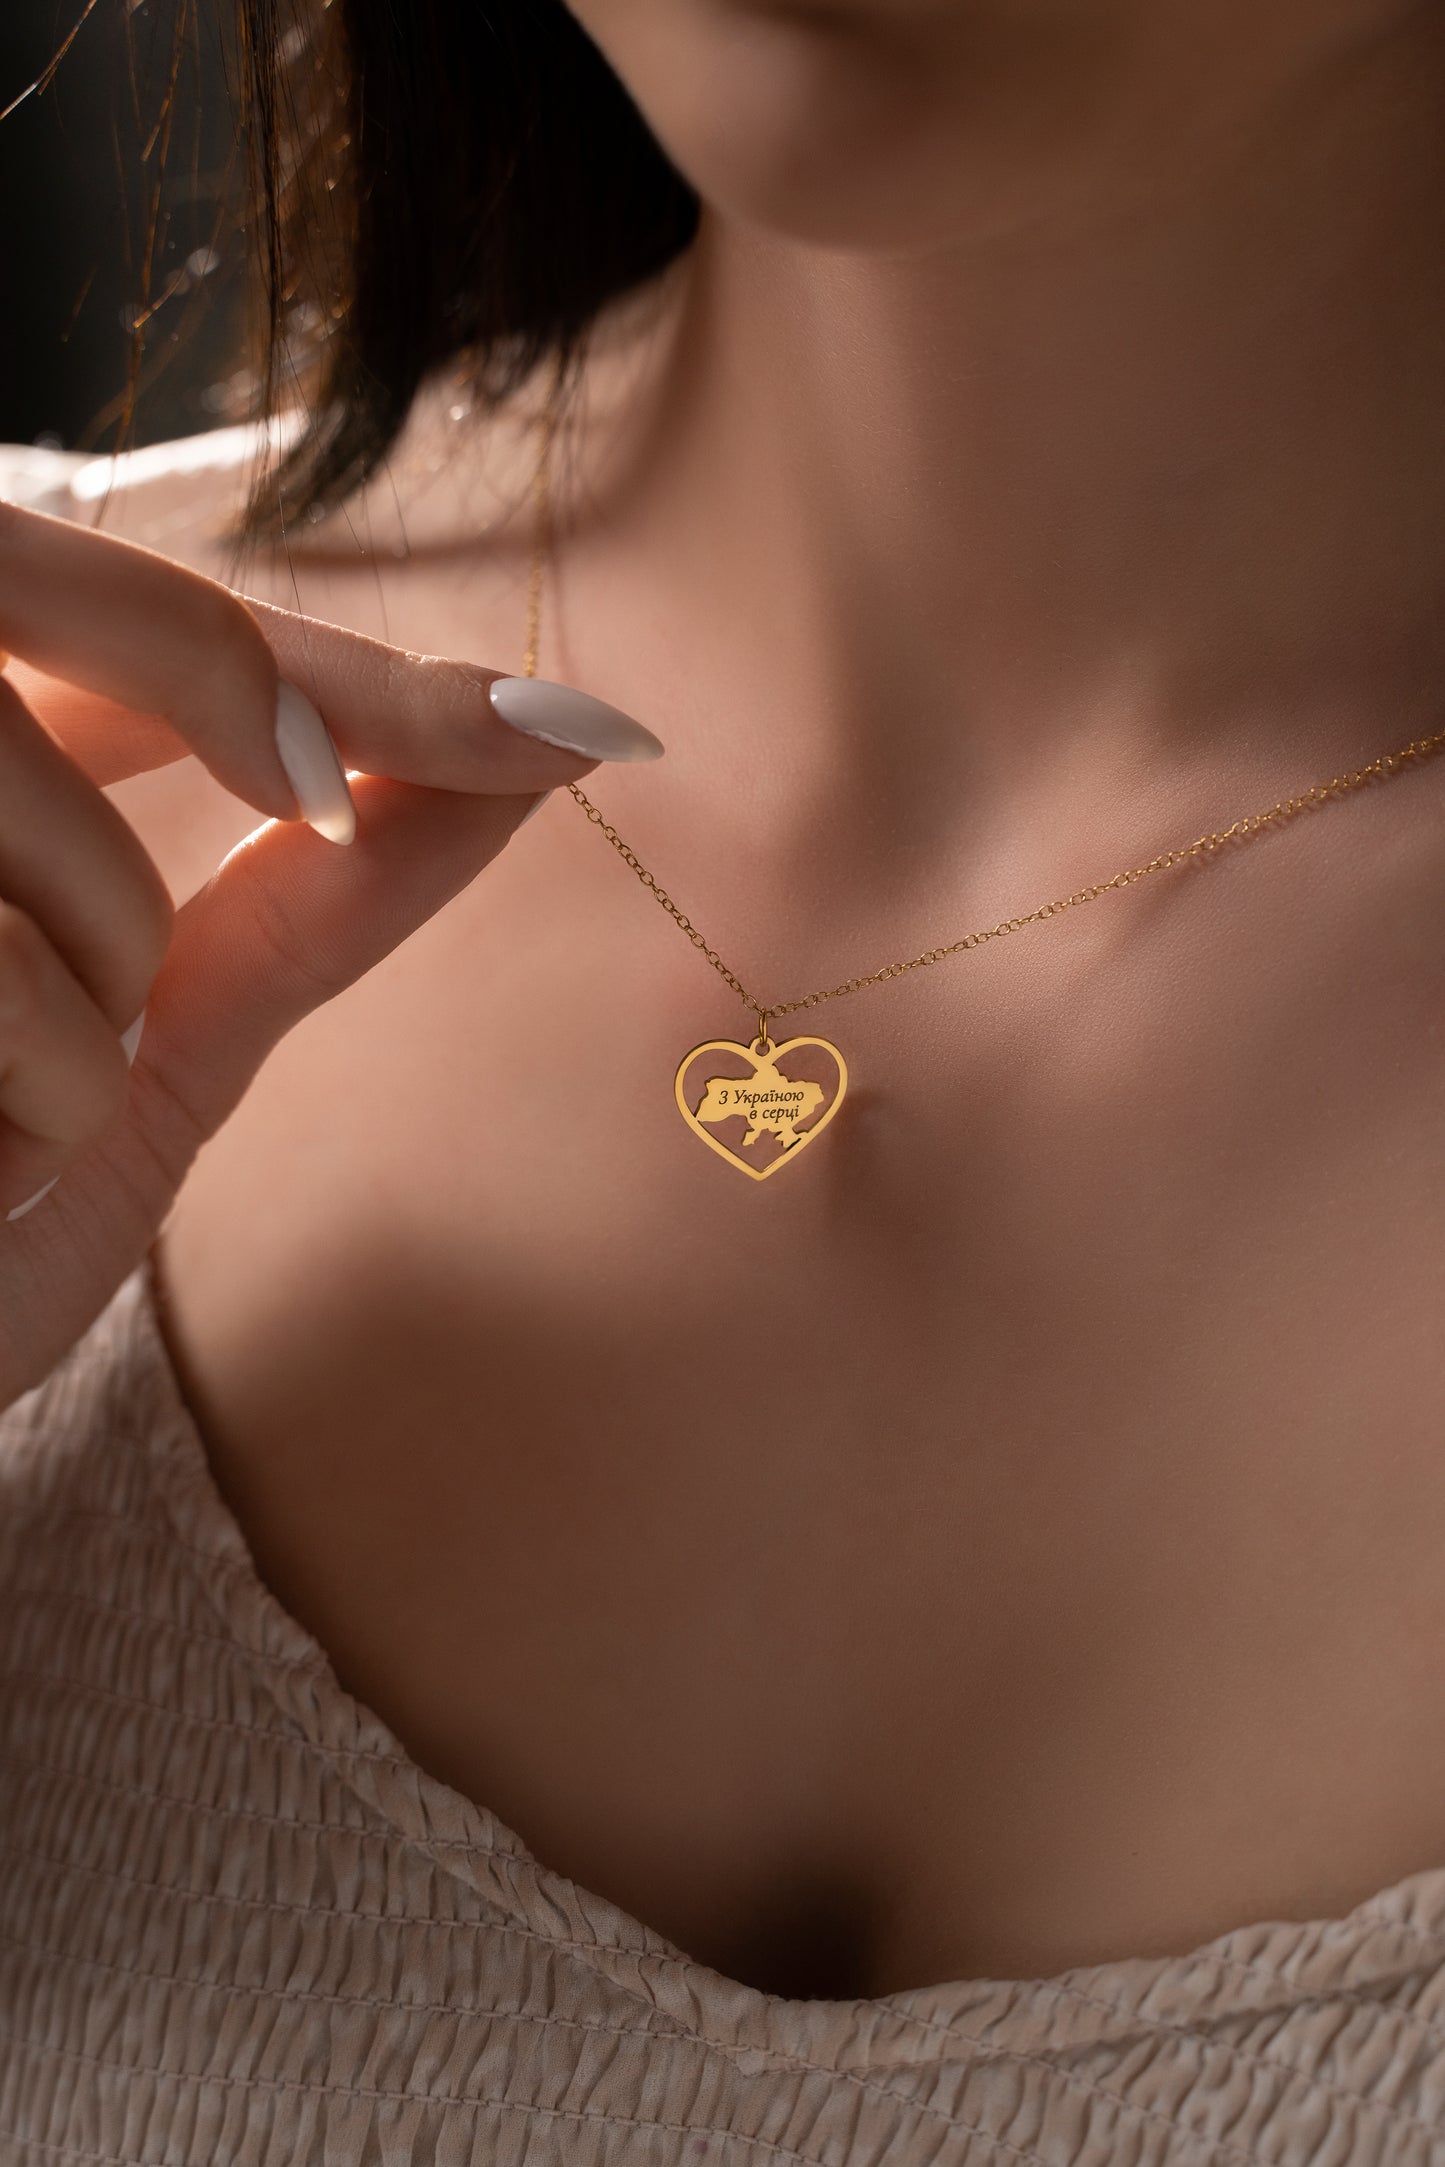 "With Ukraine in Heart" Necklace